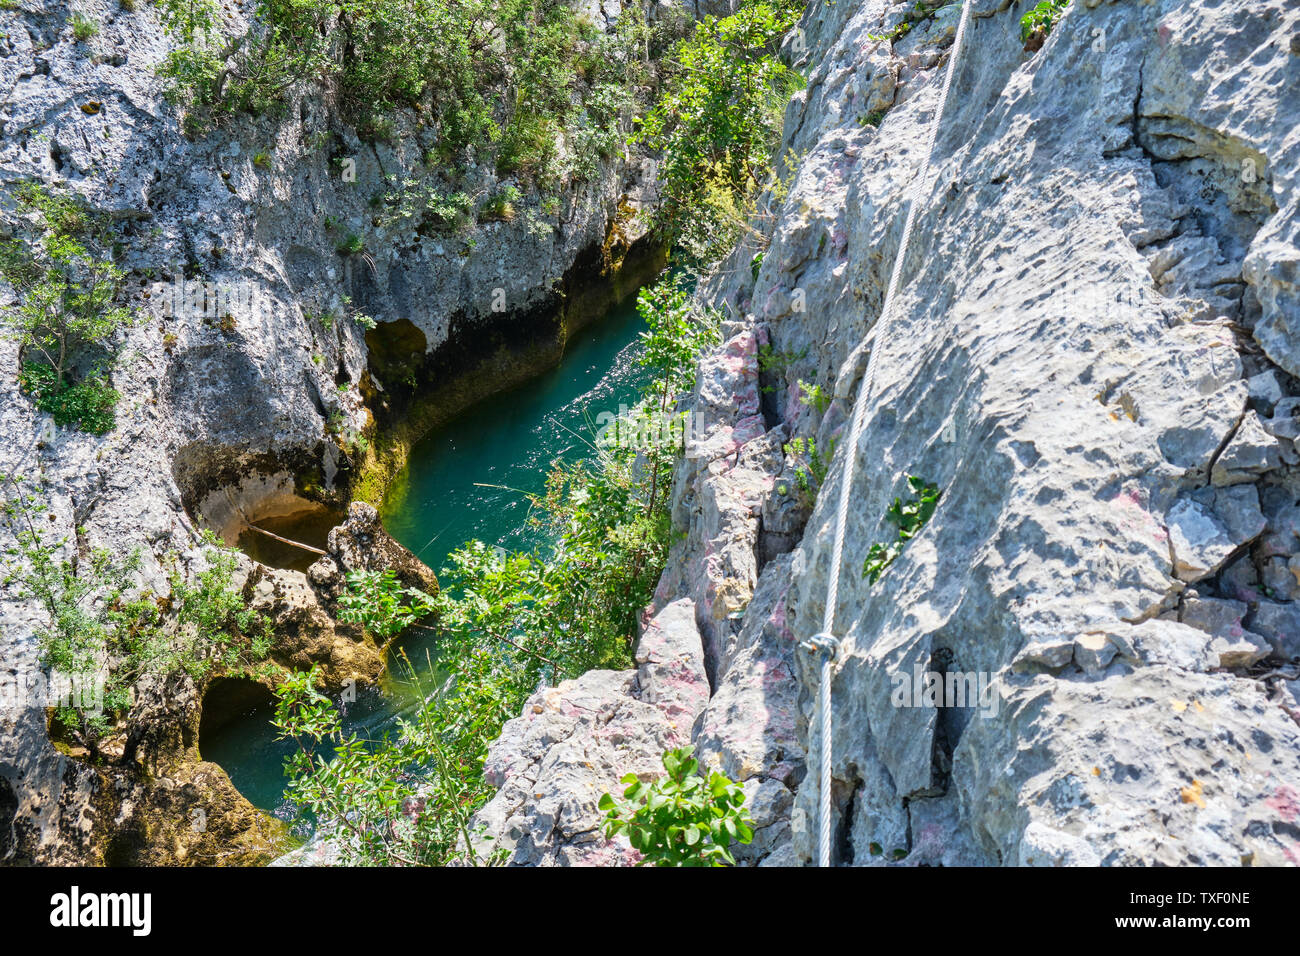 Cikola canyon in Croatia, up close, as seen from the via ferrata route above Cikola river. Tourism and adventure activities in Croatia concept Stock Photo